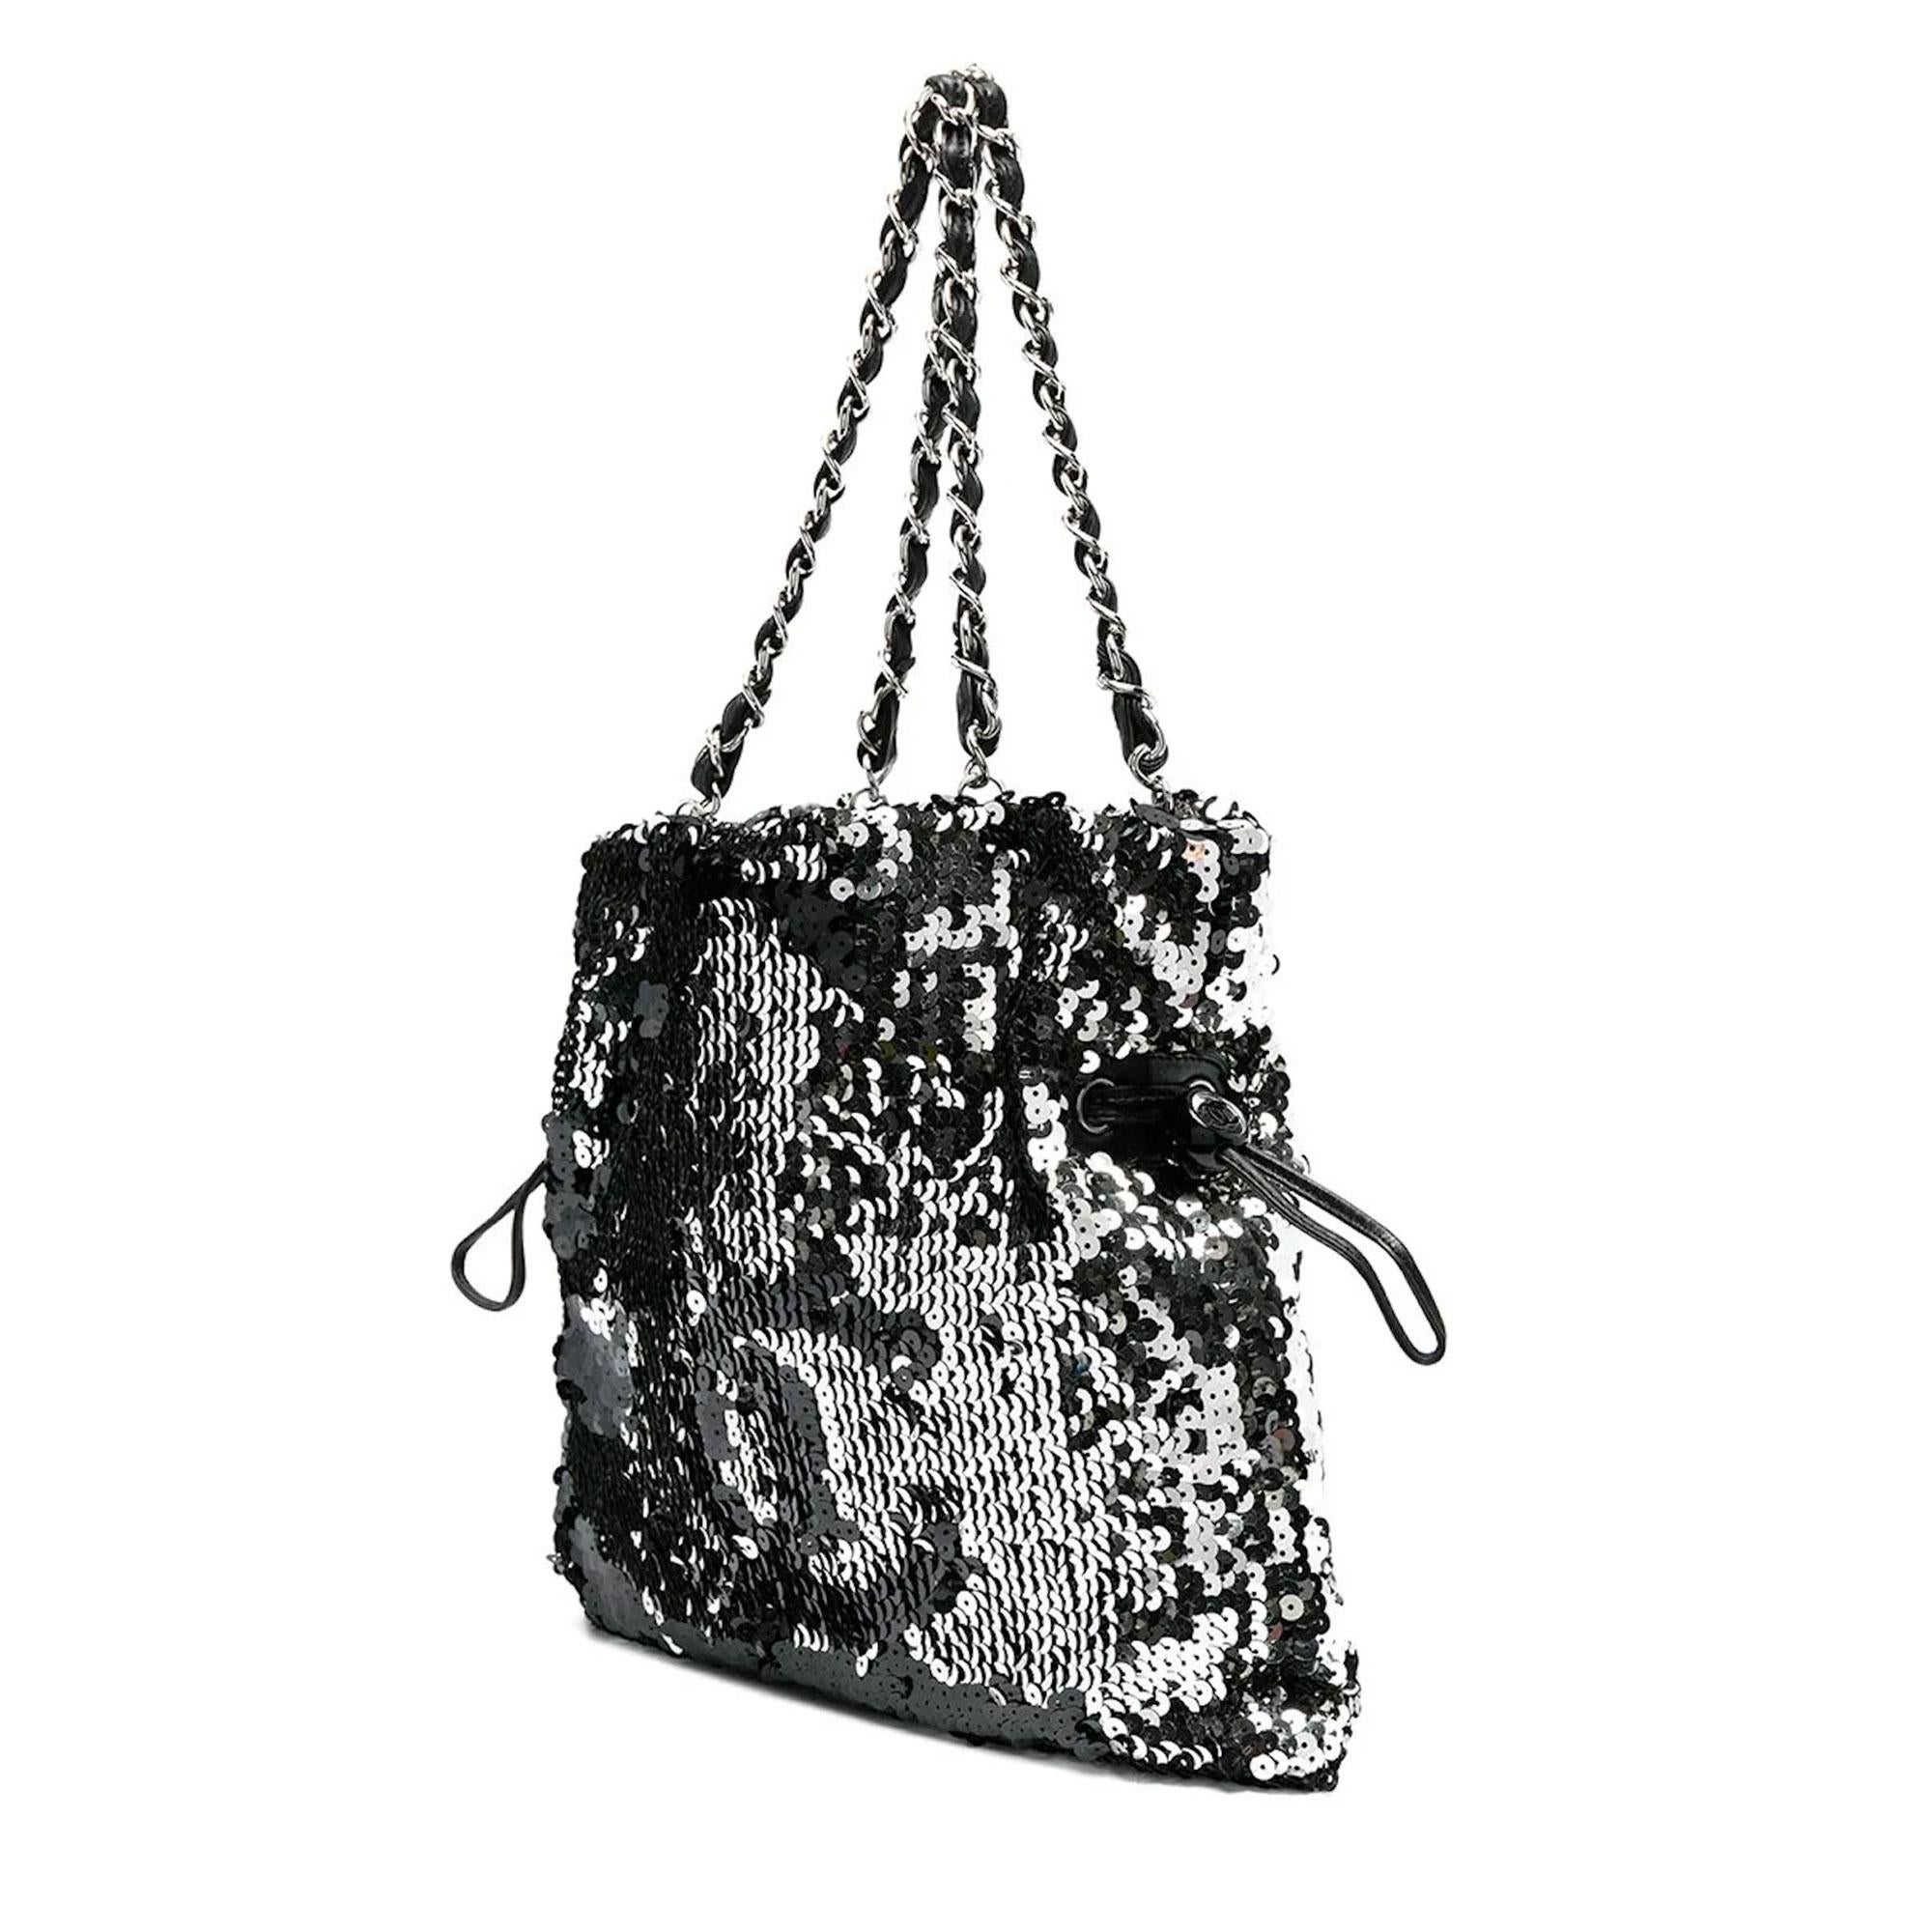 Chanel Rare 2008 Timeless Metallic Sequin Faux Drawstring CC Reversible Small Rare Silver Tote

circa 2008
silver-tone
sequin embellishment
signature interlocking CC logo
two leather and chain-link shoulder straps
faux drawstring fastening
main